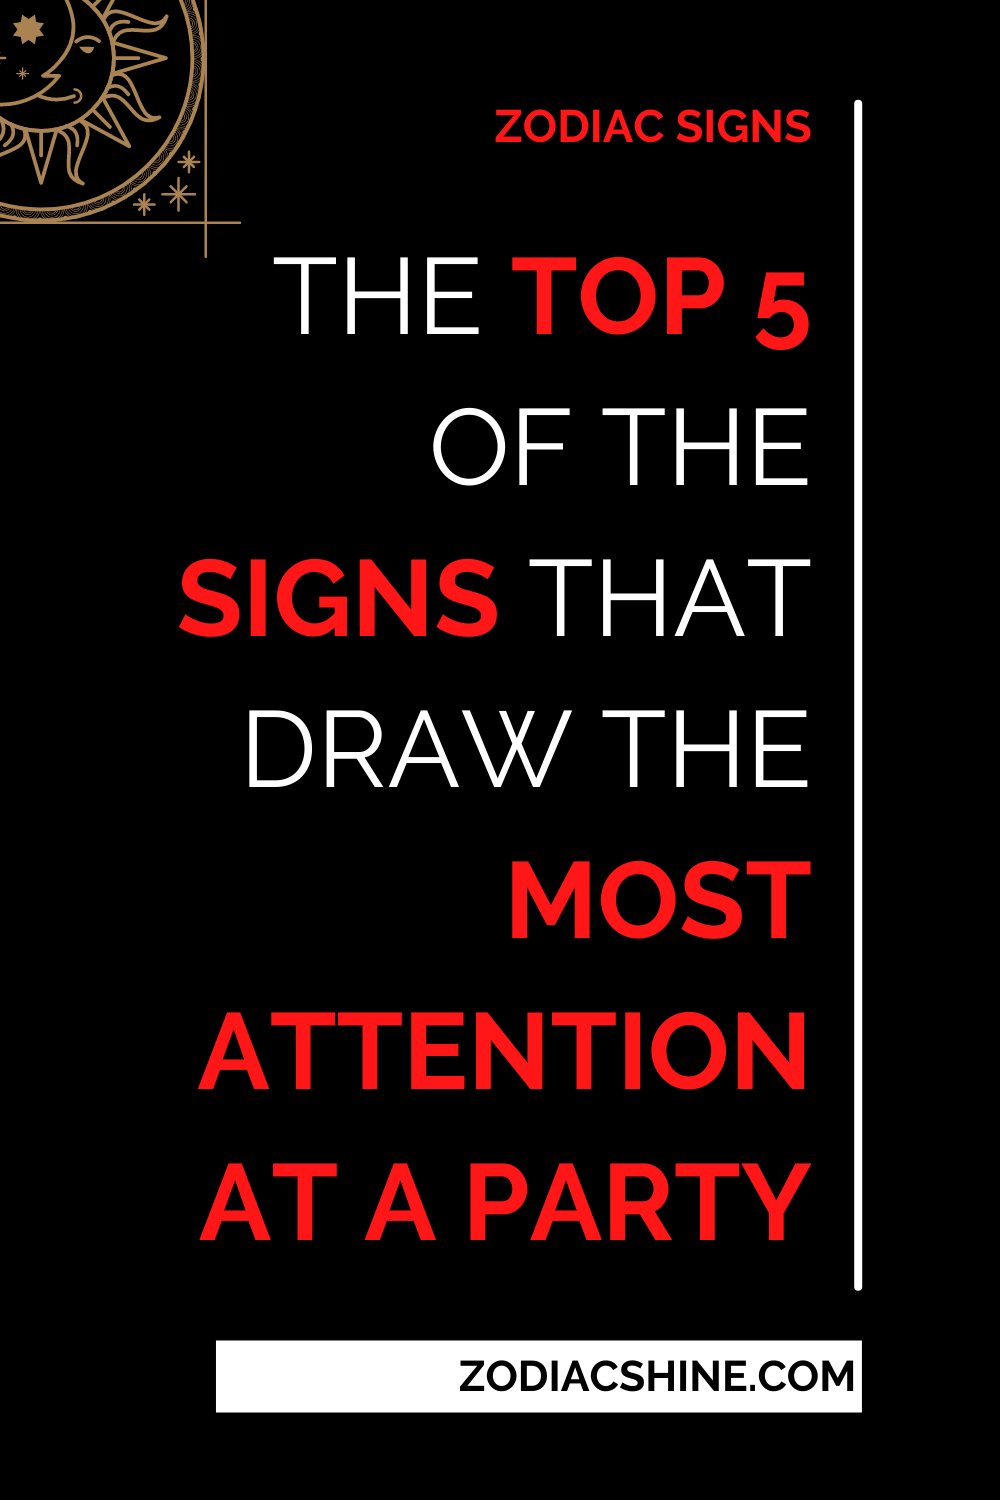 The Top 5 Of The Signs That Draw The Most Attention At A Party